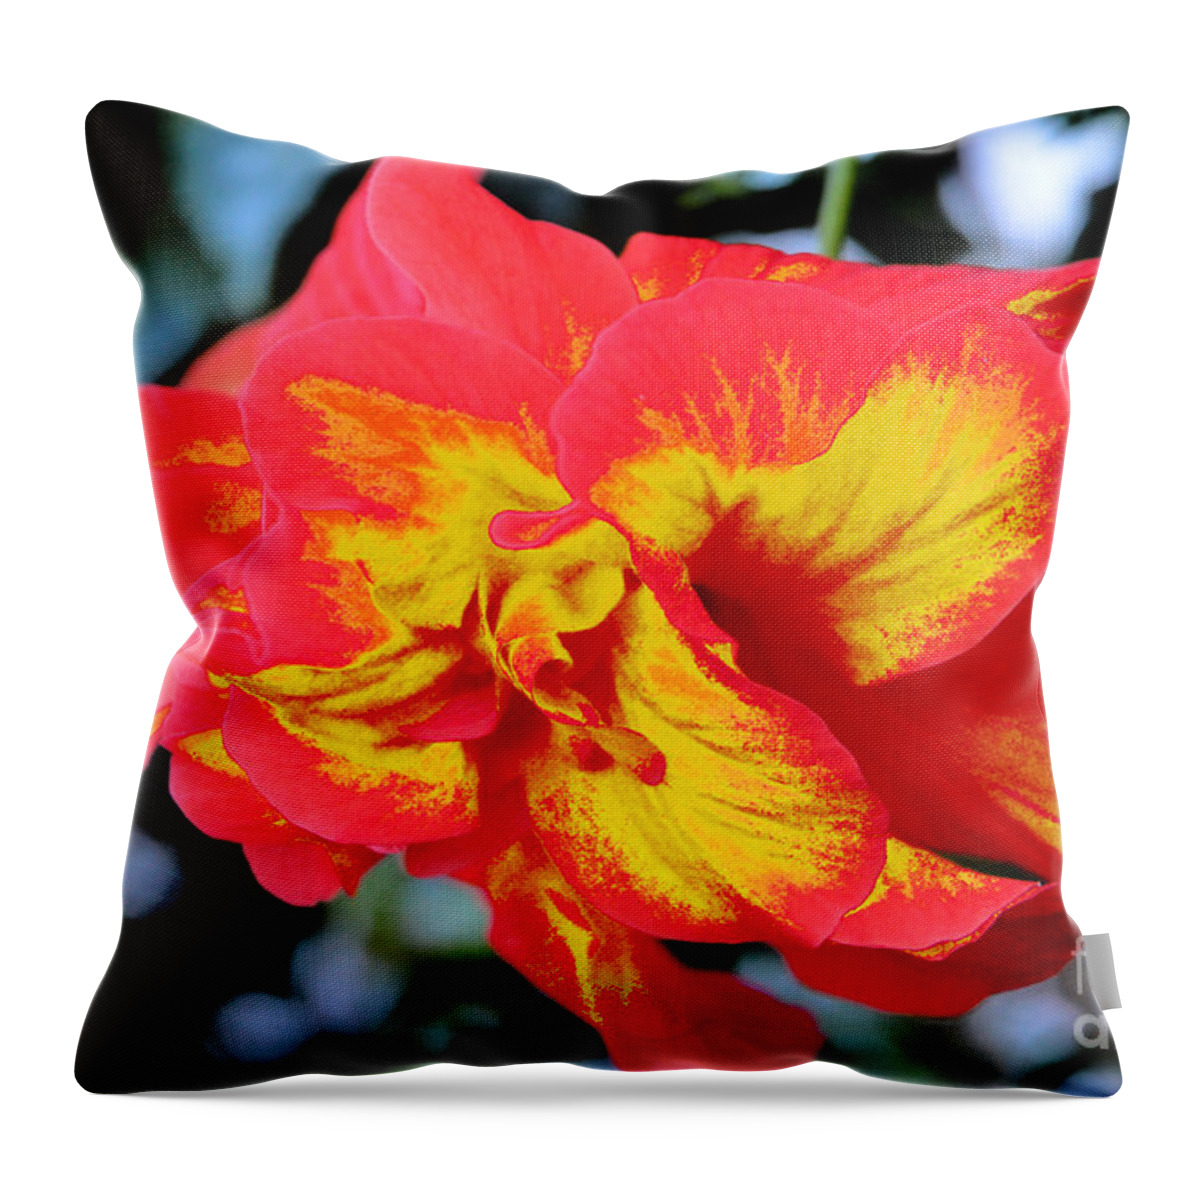  Hibiscus Throw Pillow featuring the photograph 76- Painted Hibiscus by Joseph Keane